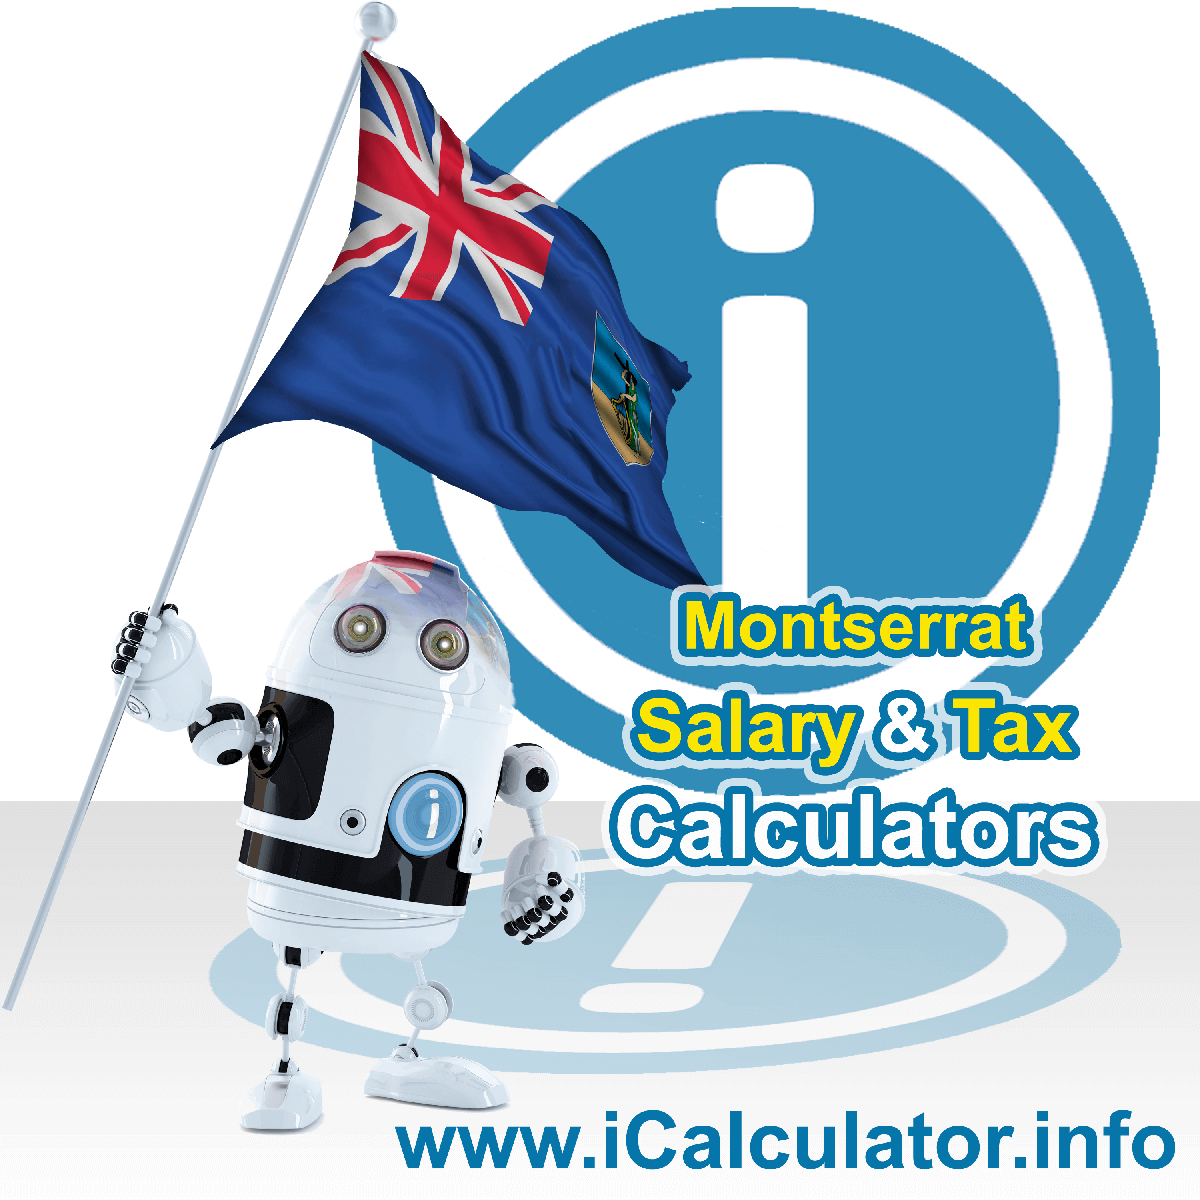 Montserrat Wage Calculator. This image shows the Montserrat flag and information relating to the tax formula for the Montserrat Tax Calculator